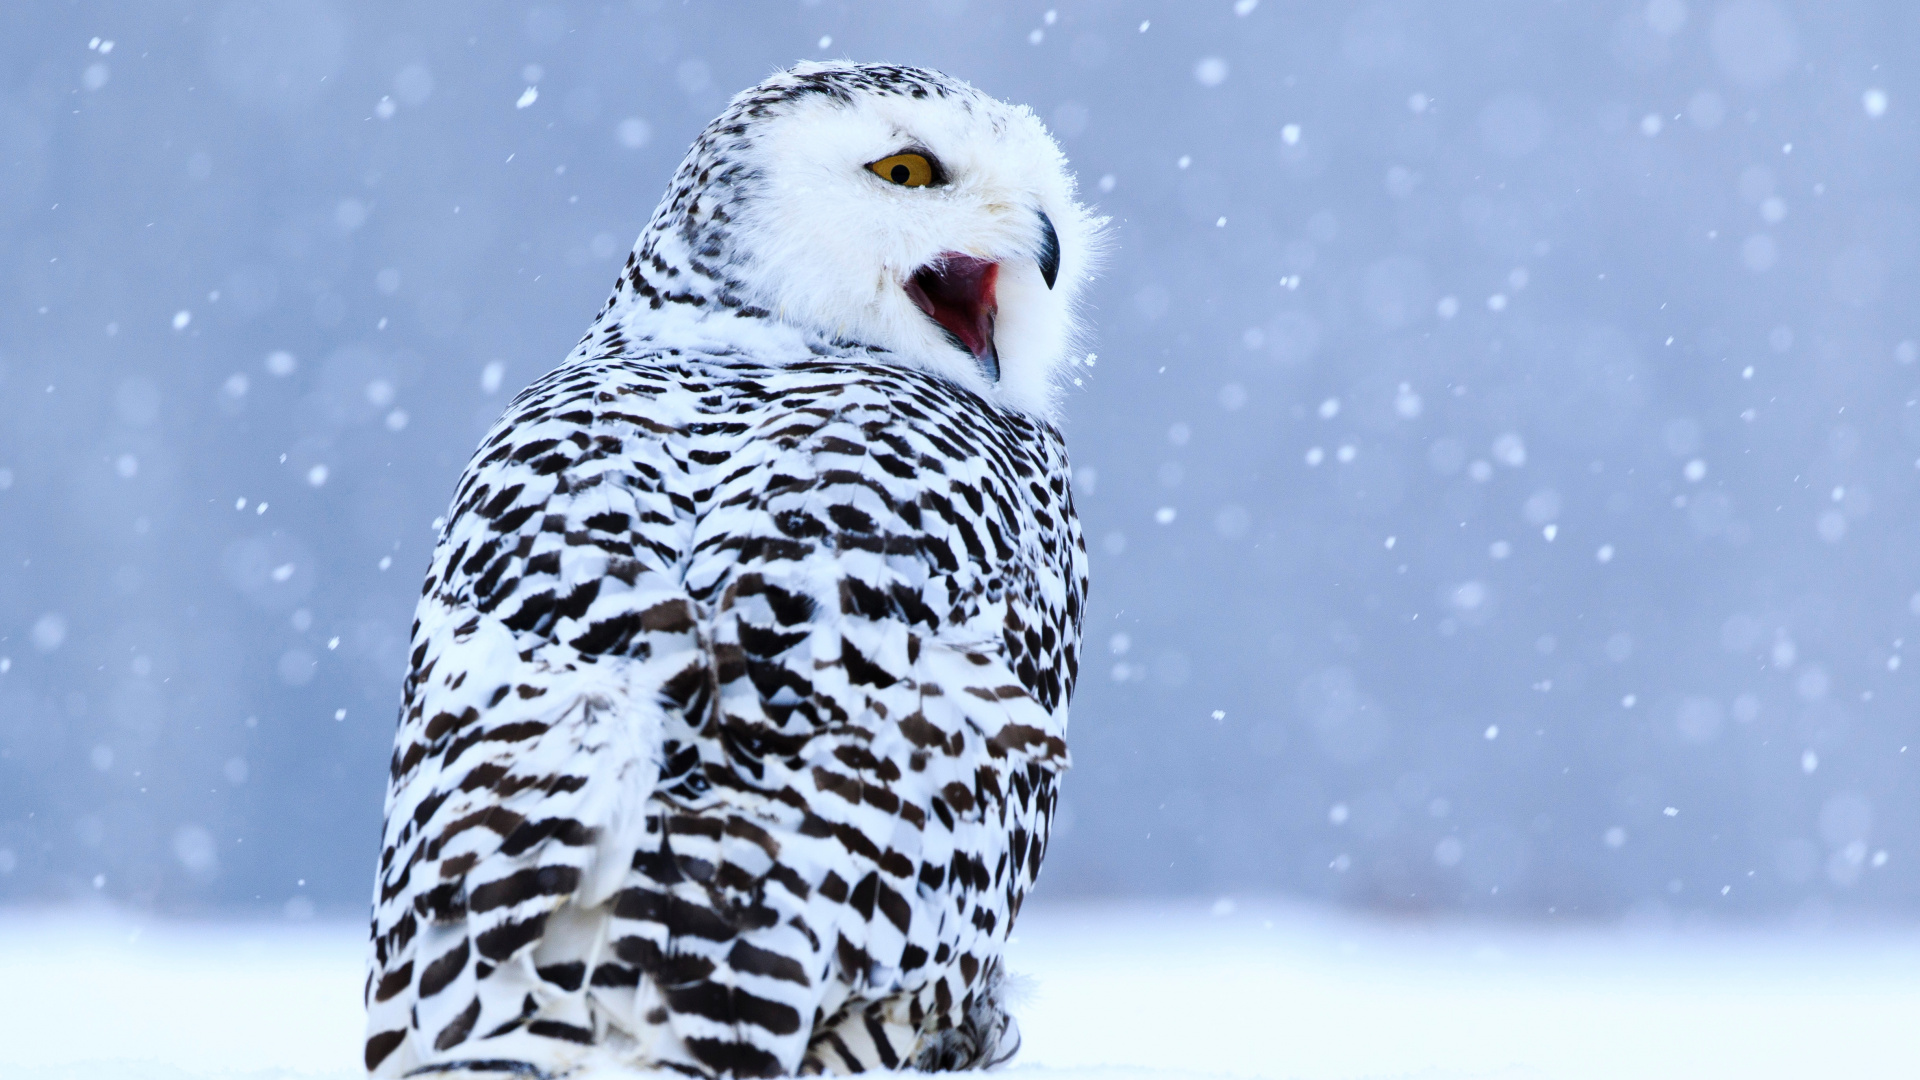 White and Black Owl on Snow Covered Ground During Daytime. Wallpaper in 1920x1080 Resolution